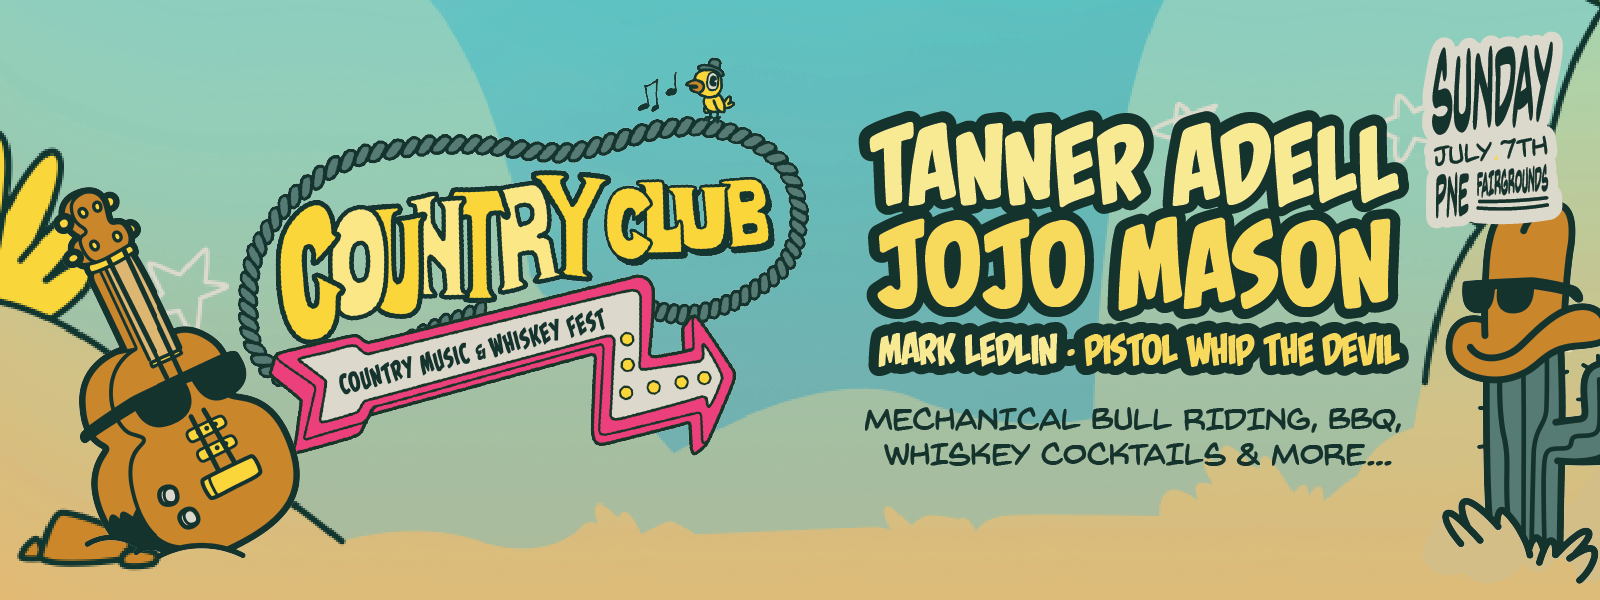 Country Club - Country Music & Whiskey Festival